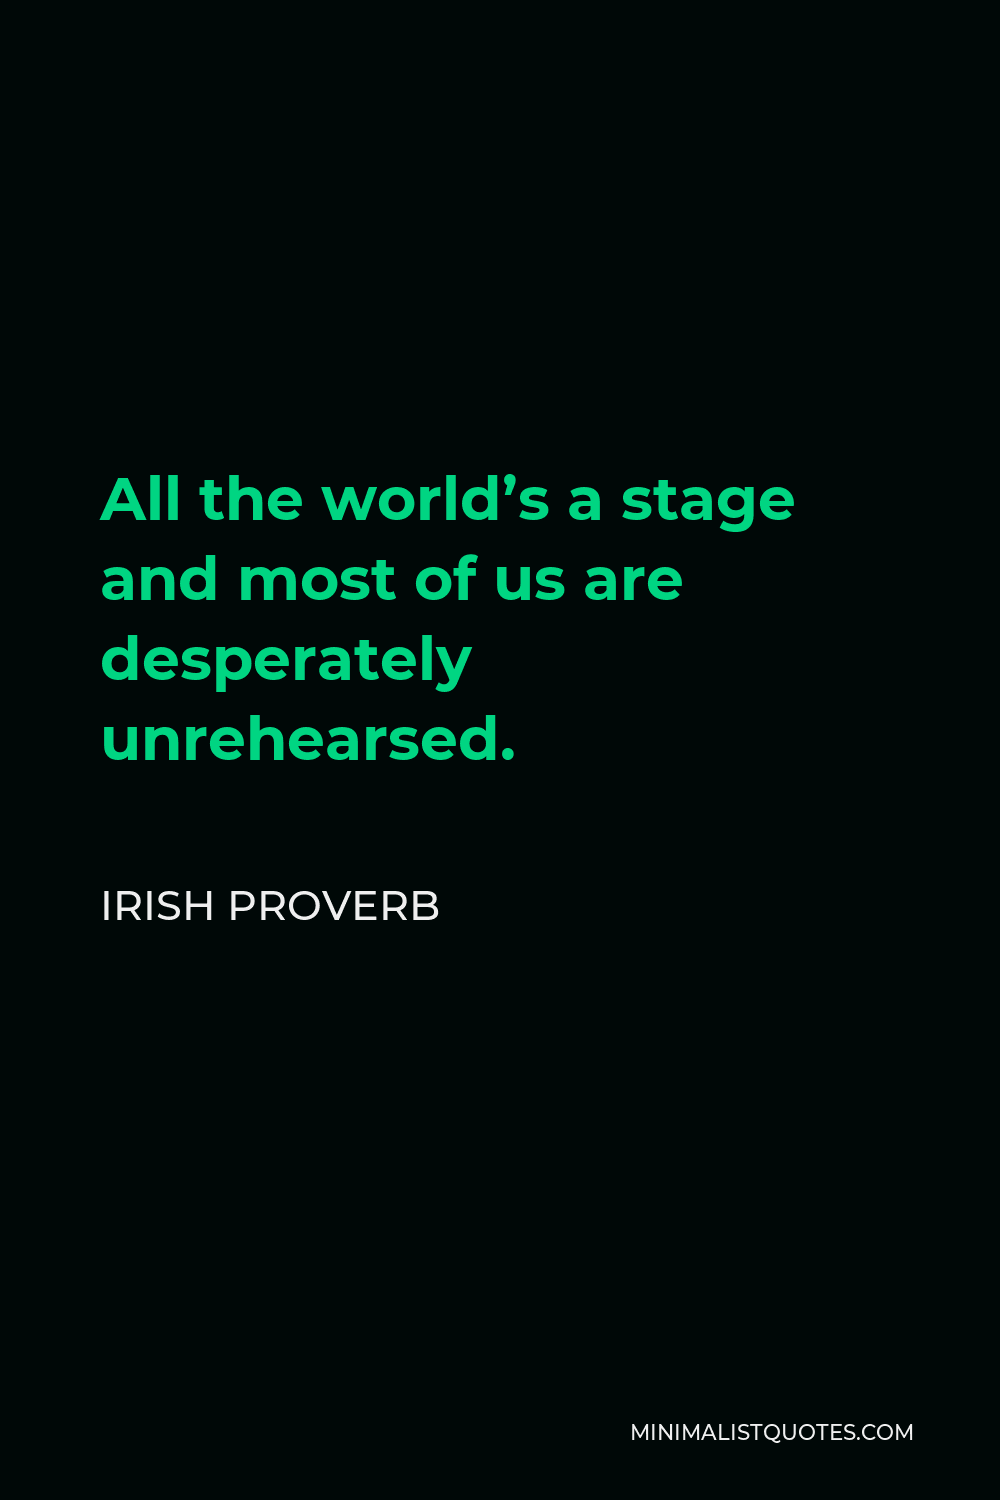 Irish Proverb Quote - All the world’s a stage and most of us are desperately unrehearsed.